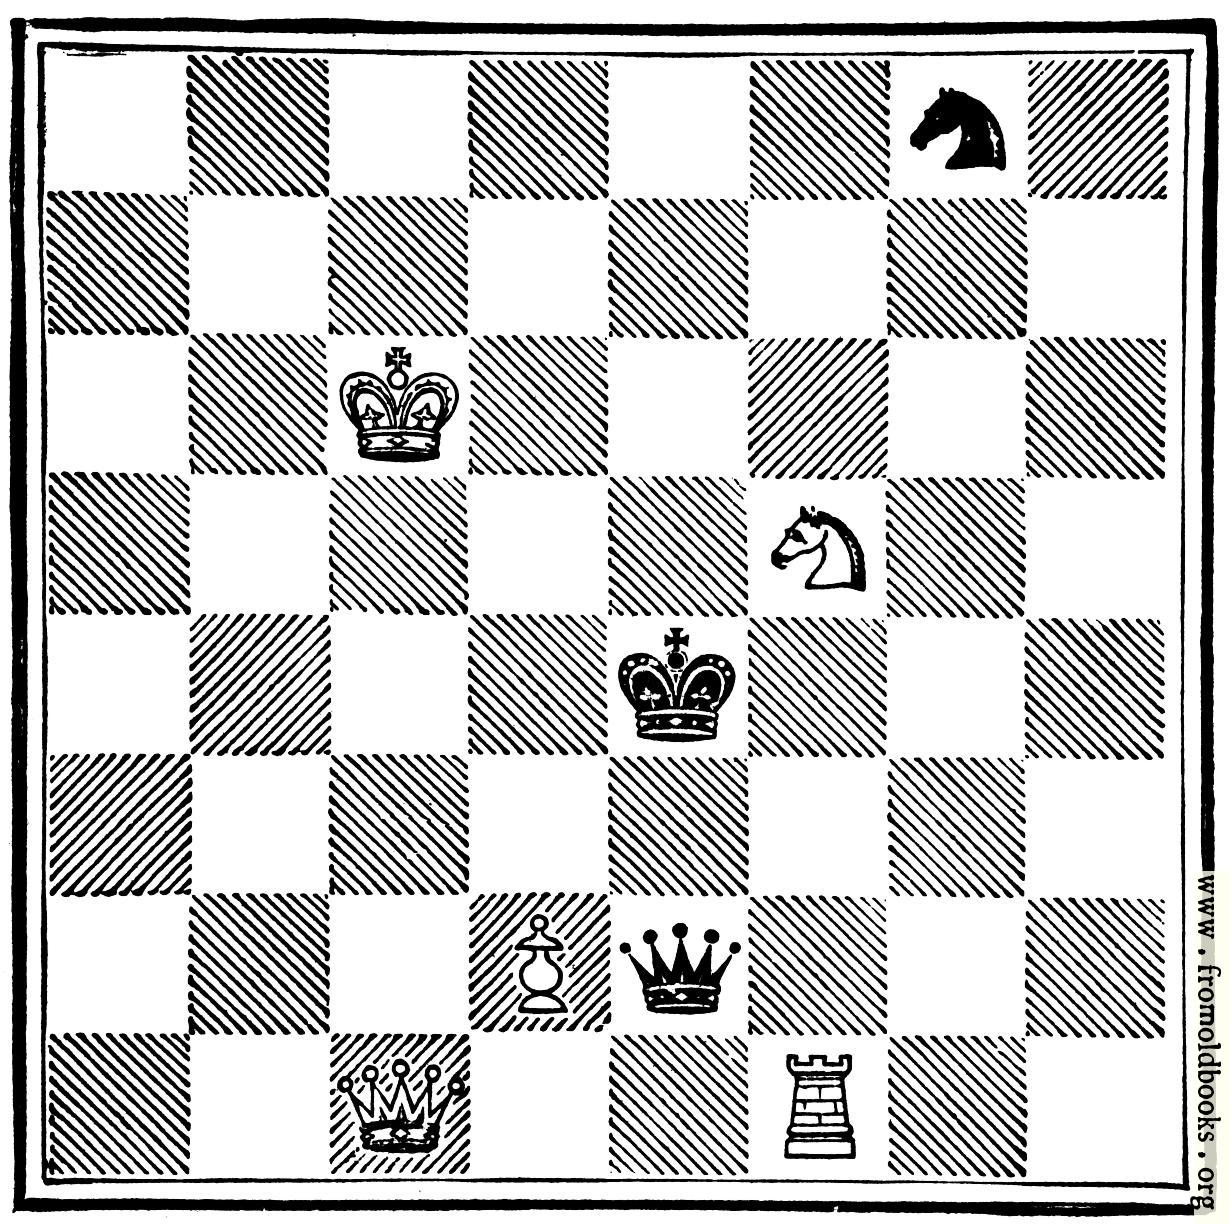 [Picture: White Pawn (Alice) to play, and win in eleven moves.]